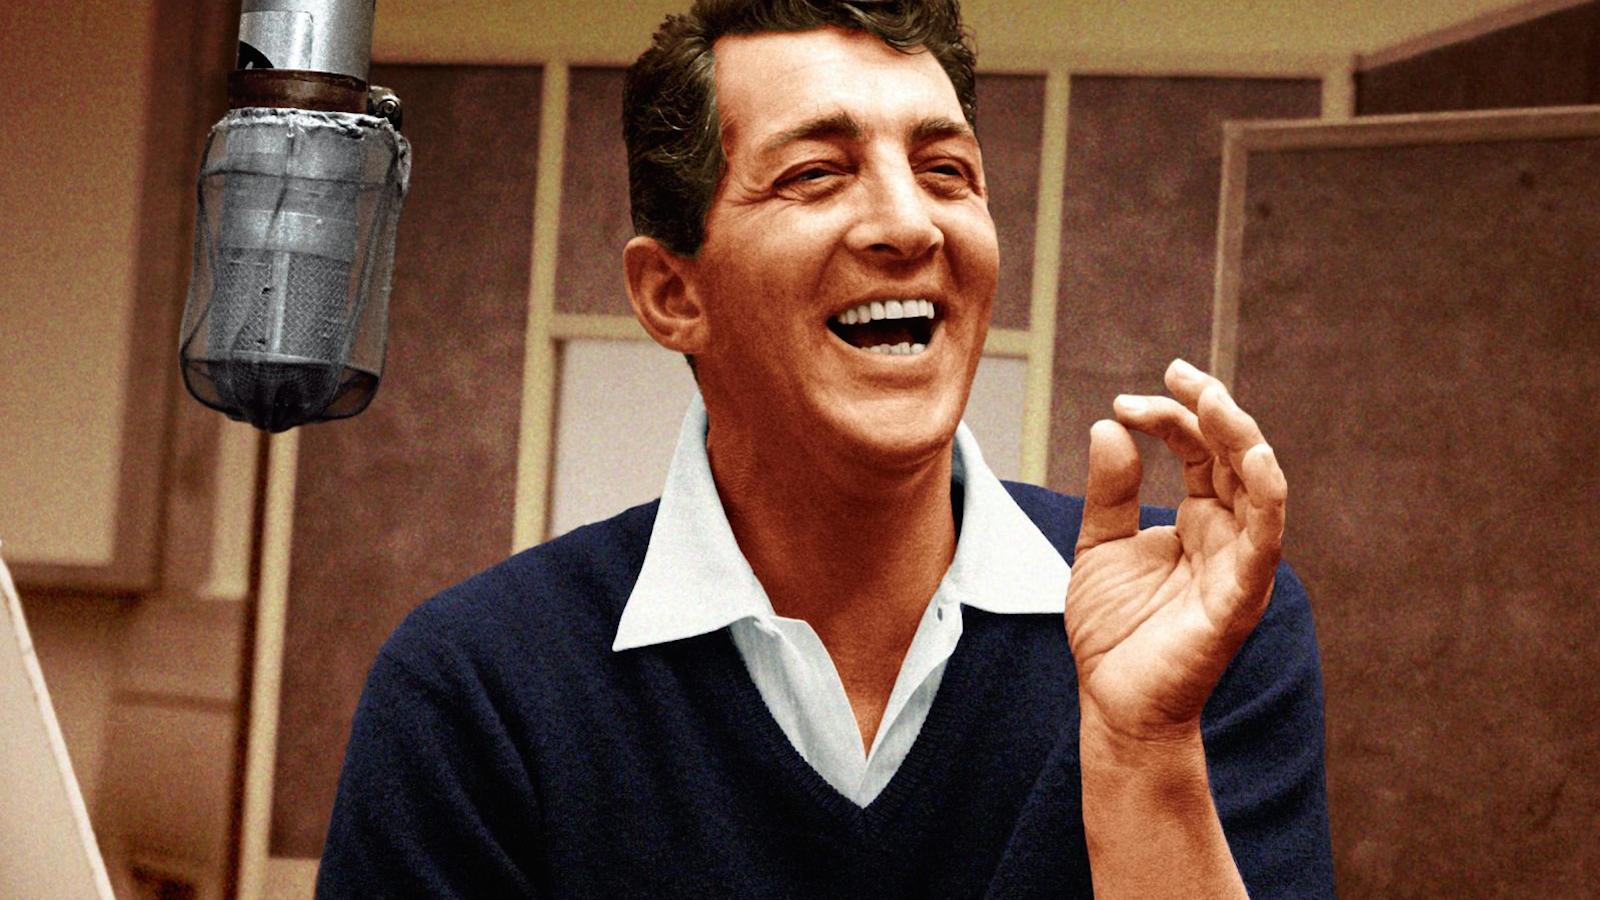 Abundantly Charming Picture of Dean Martin